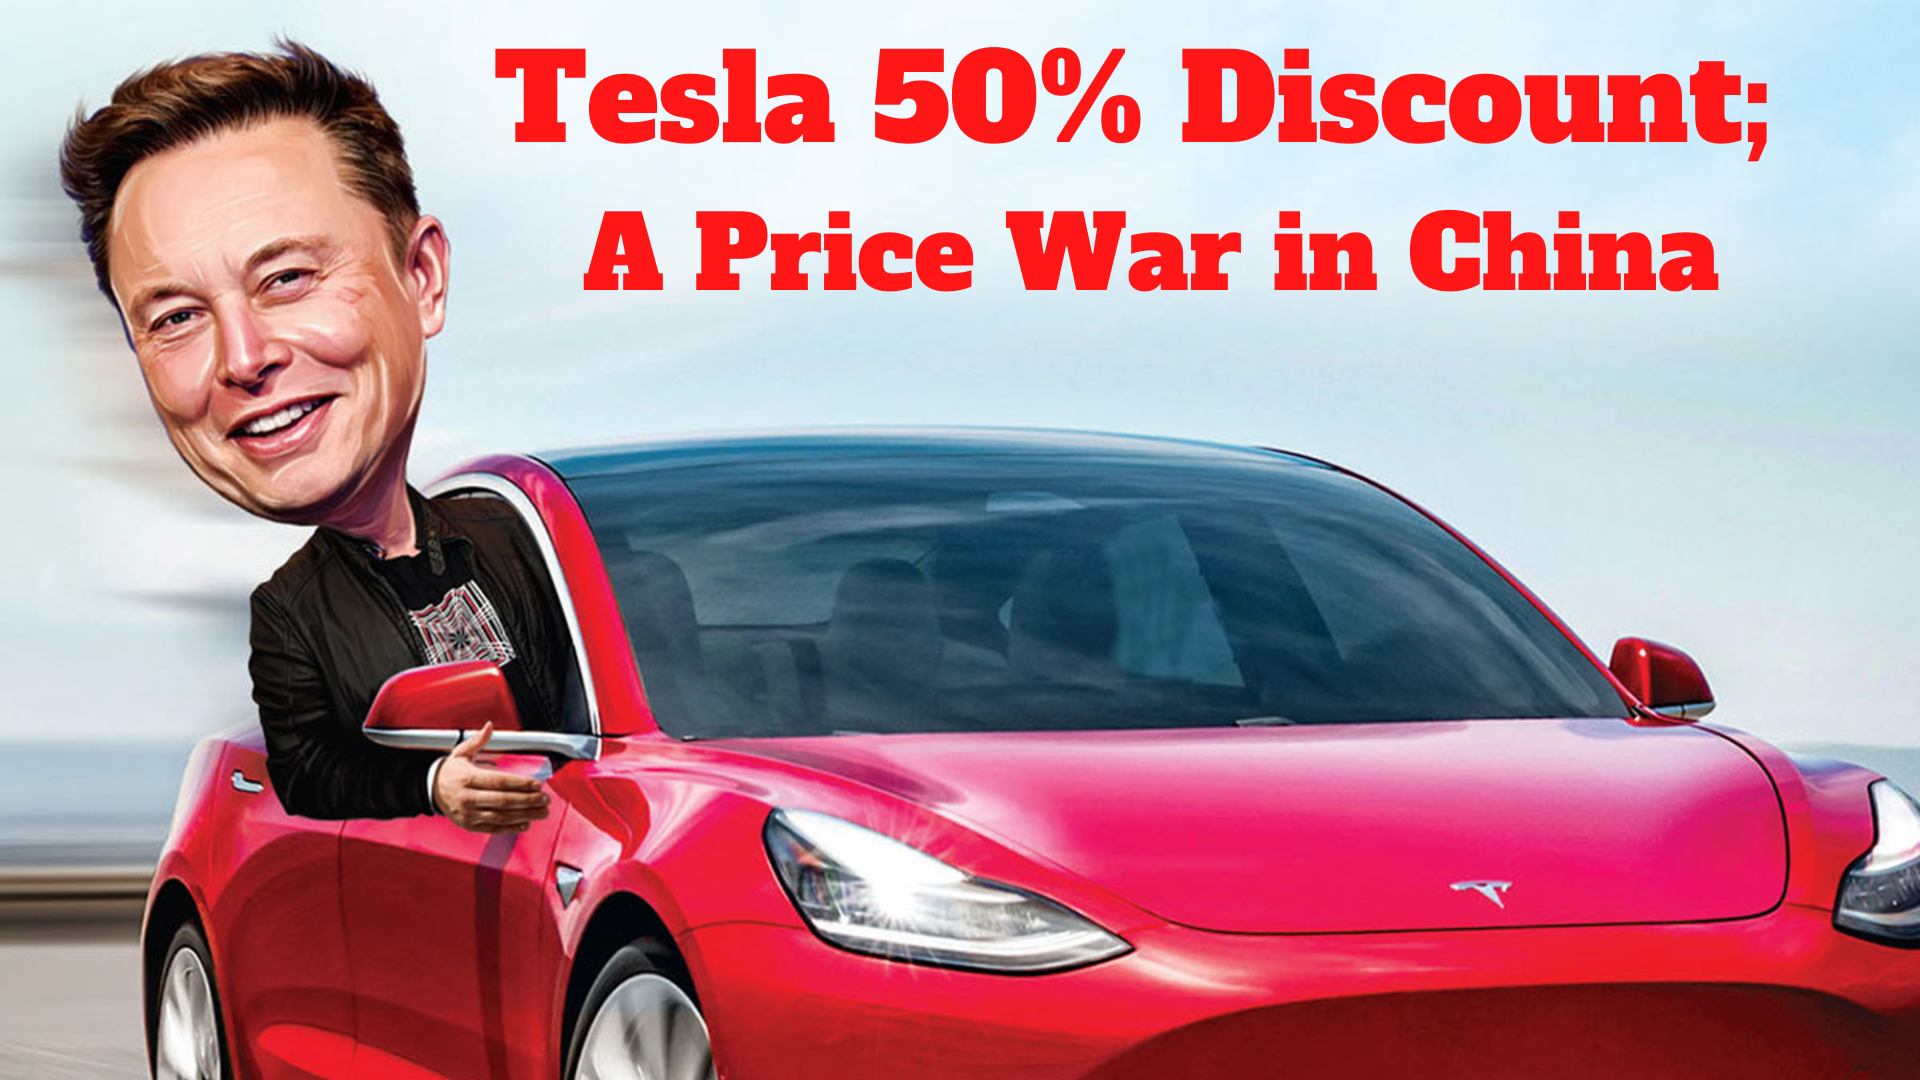 Tesla 50% Discount; A Price War has triggered in China, the world’s largest car market, with heavy discounts that could drive some automakers out of business.